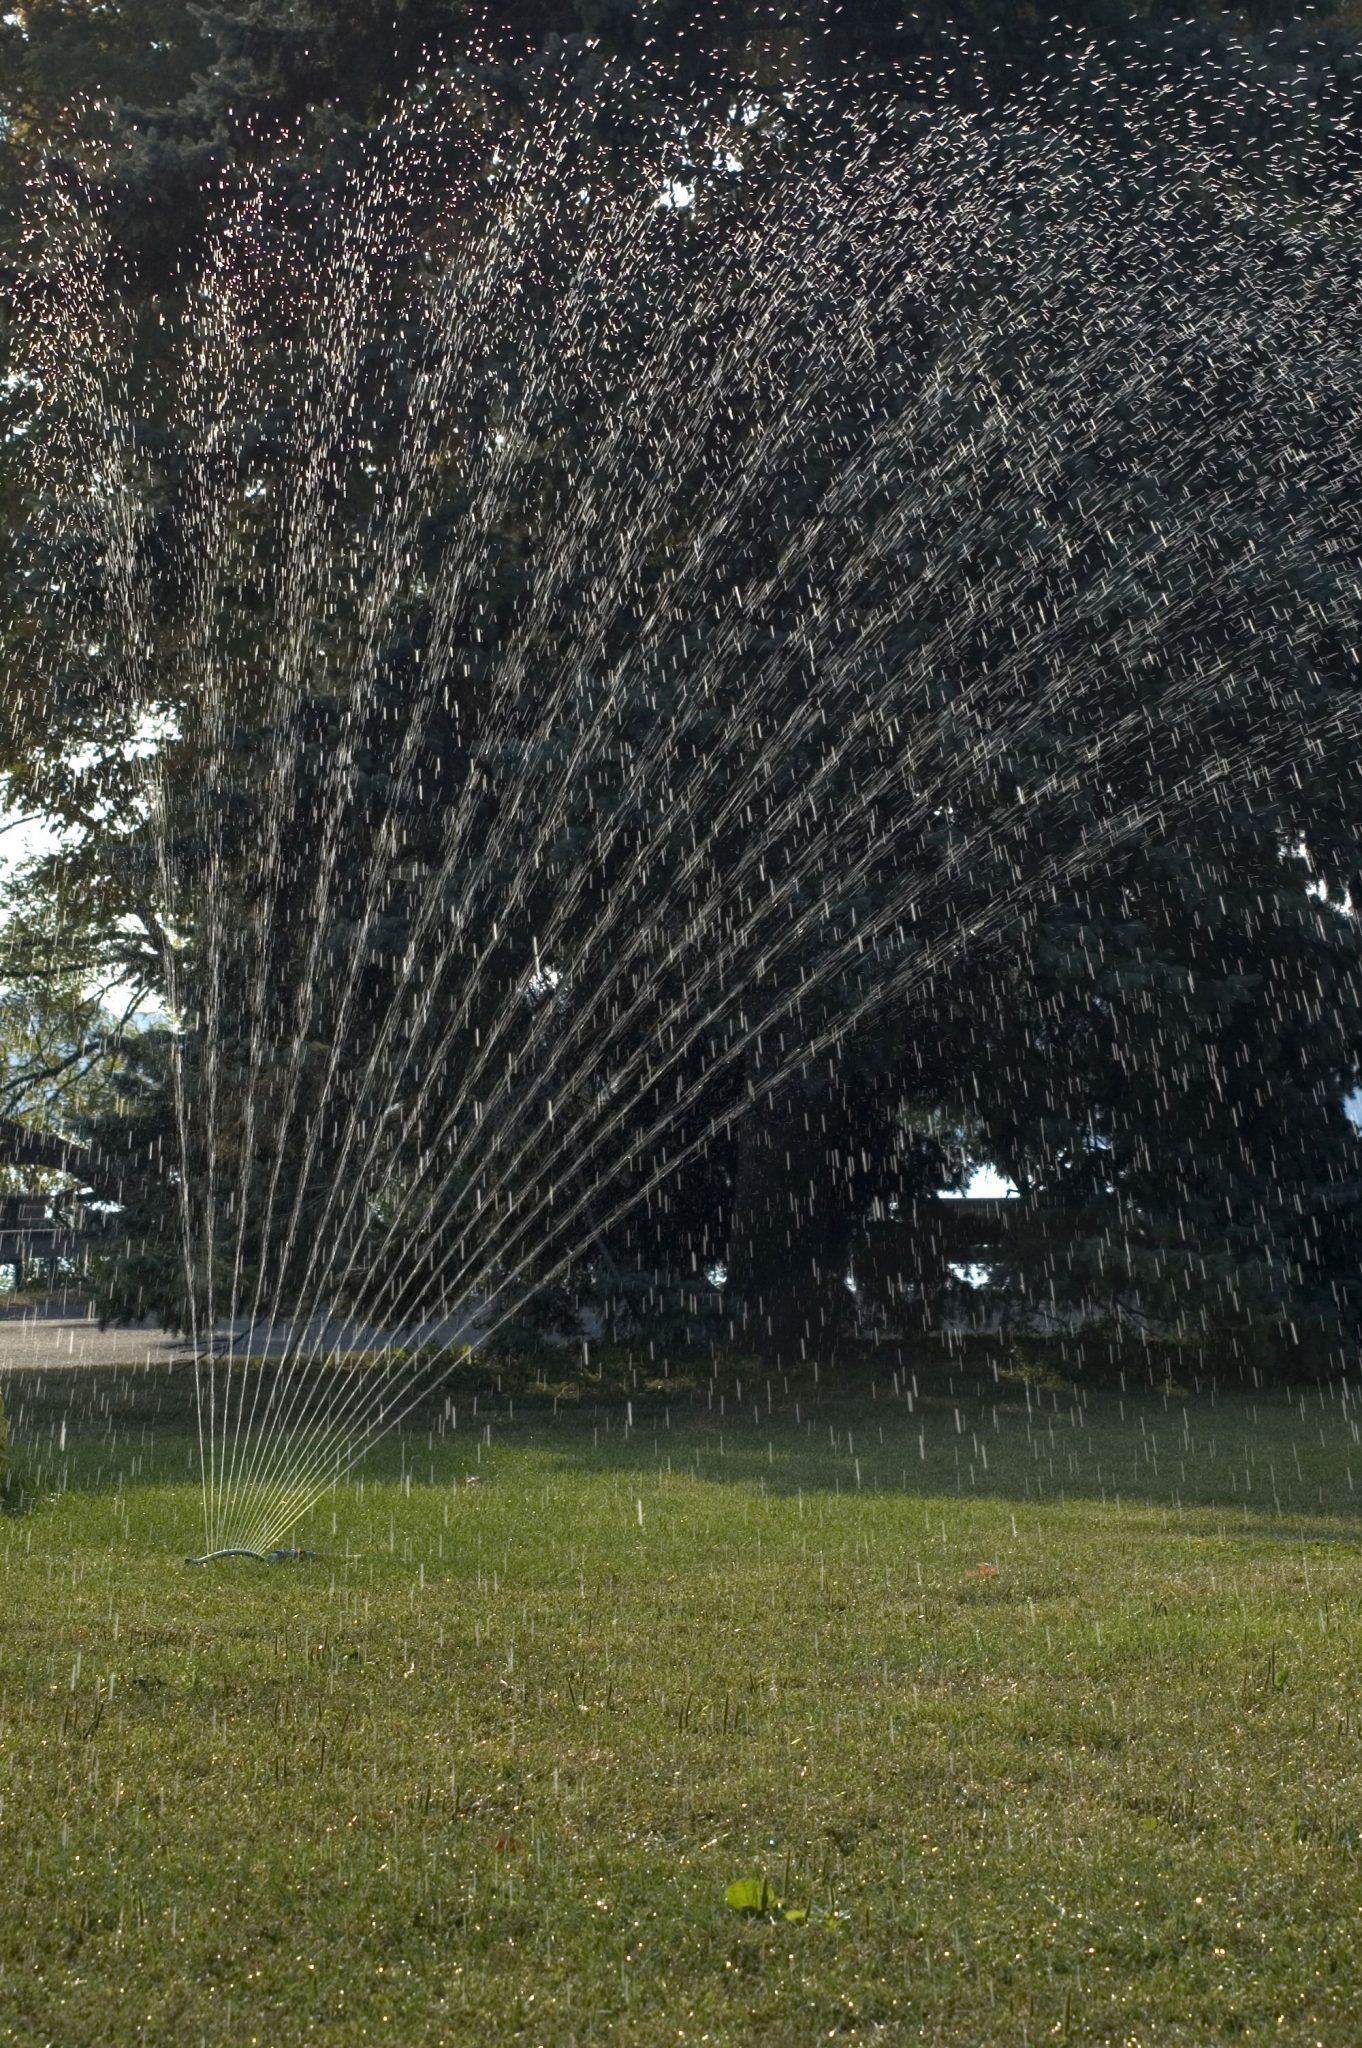 Ways to save water: Reduce Lawn Irrigation to Save Water